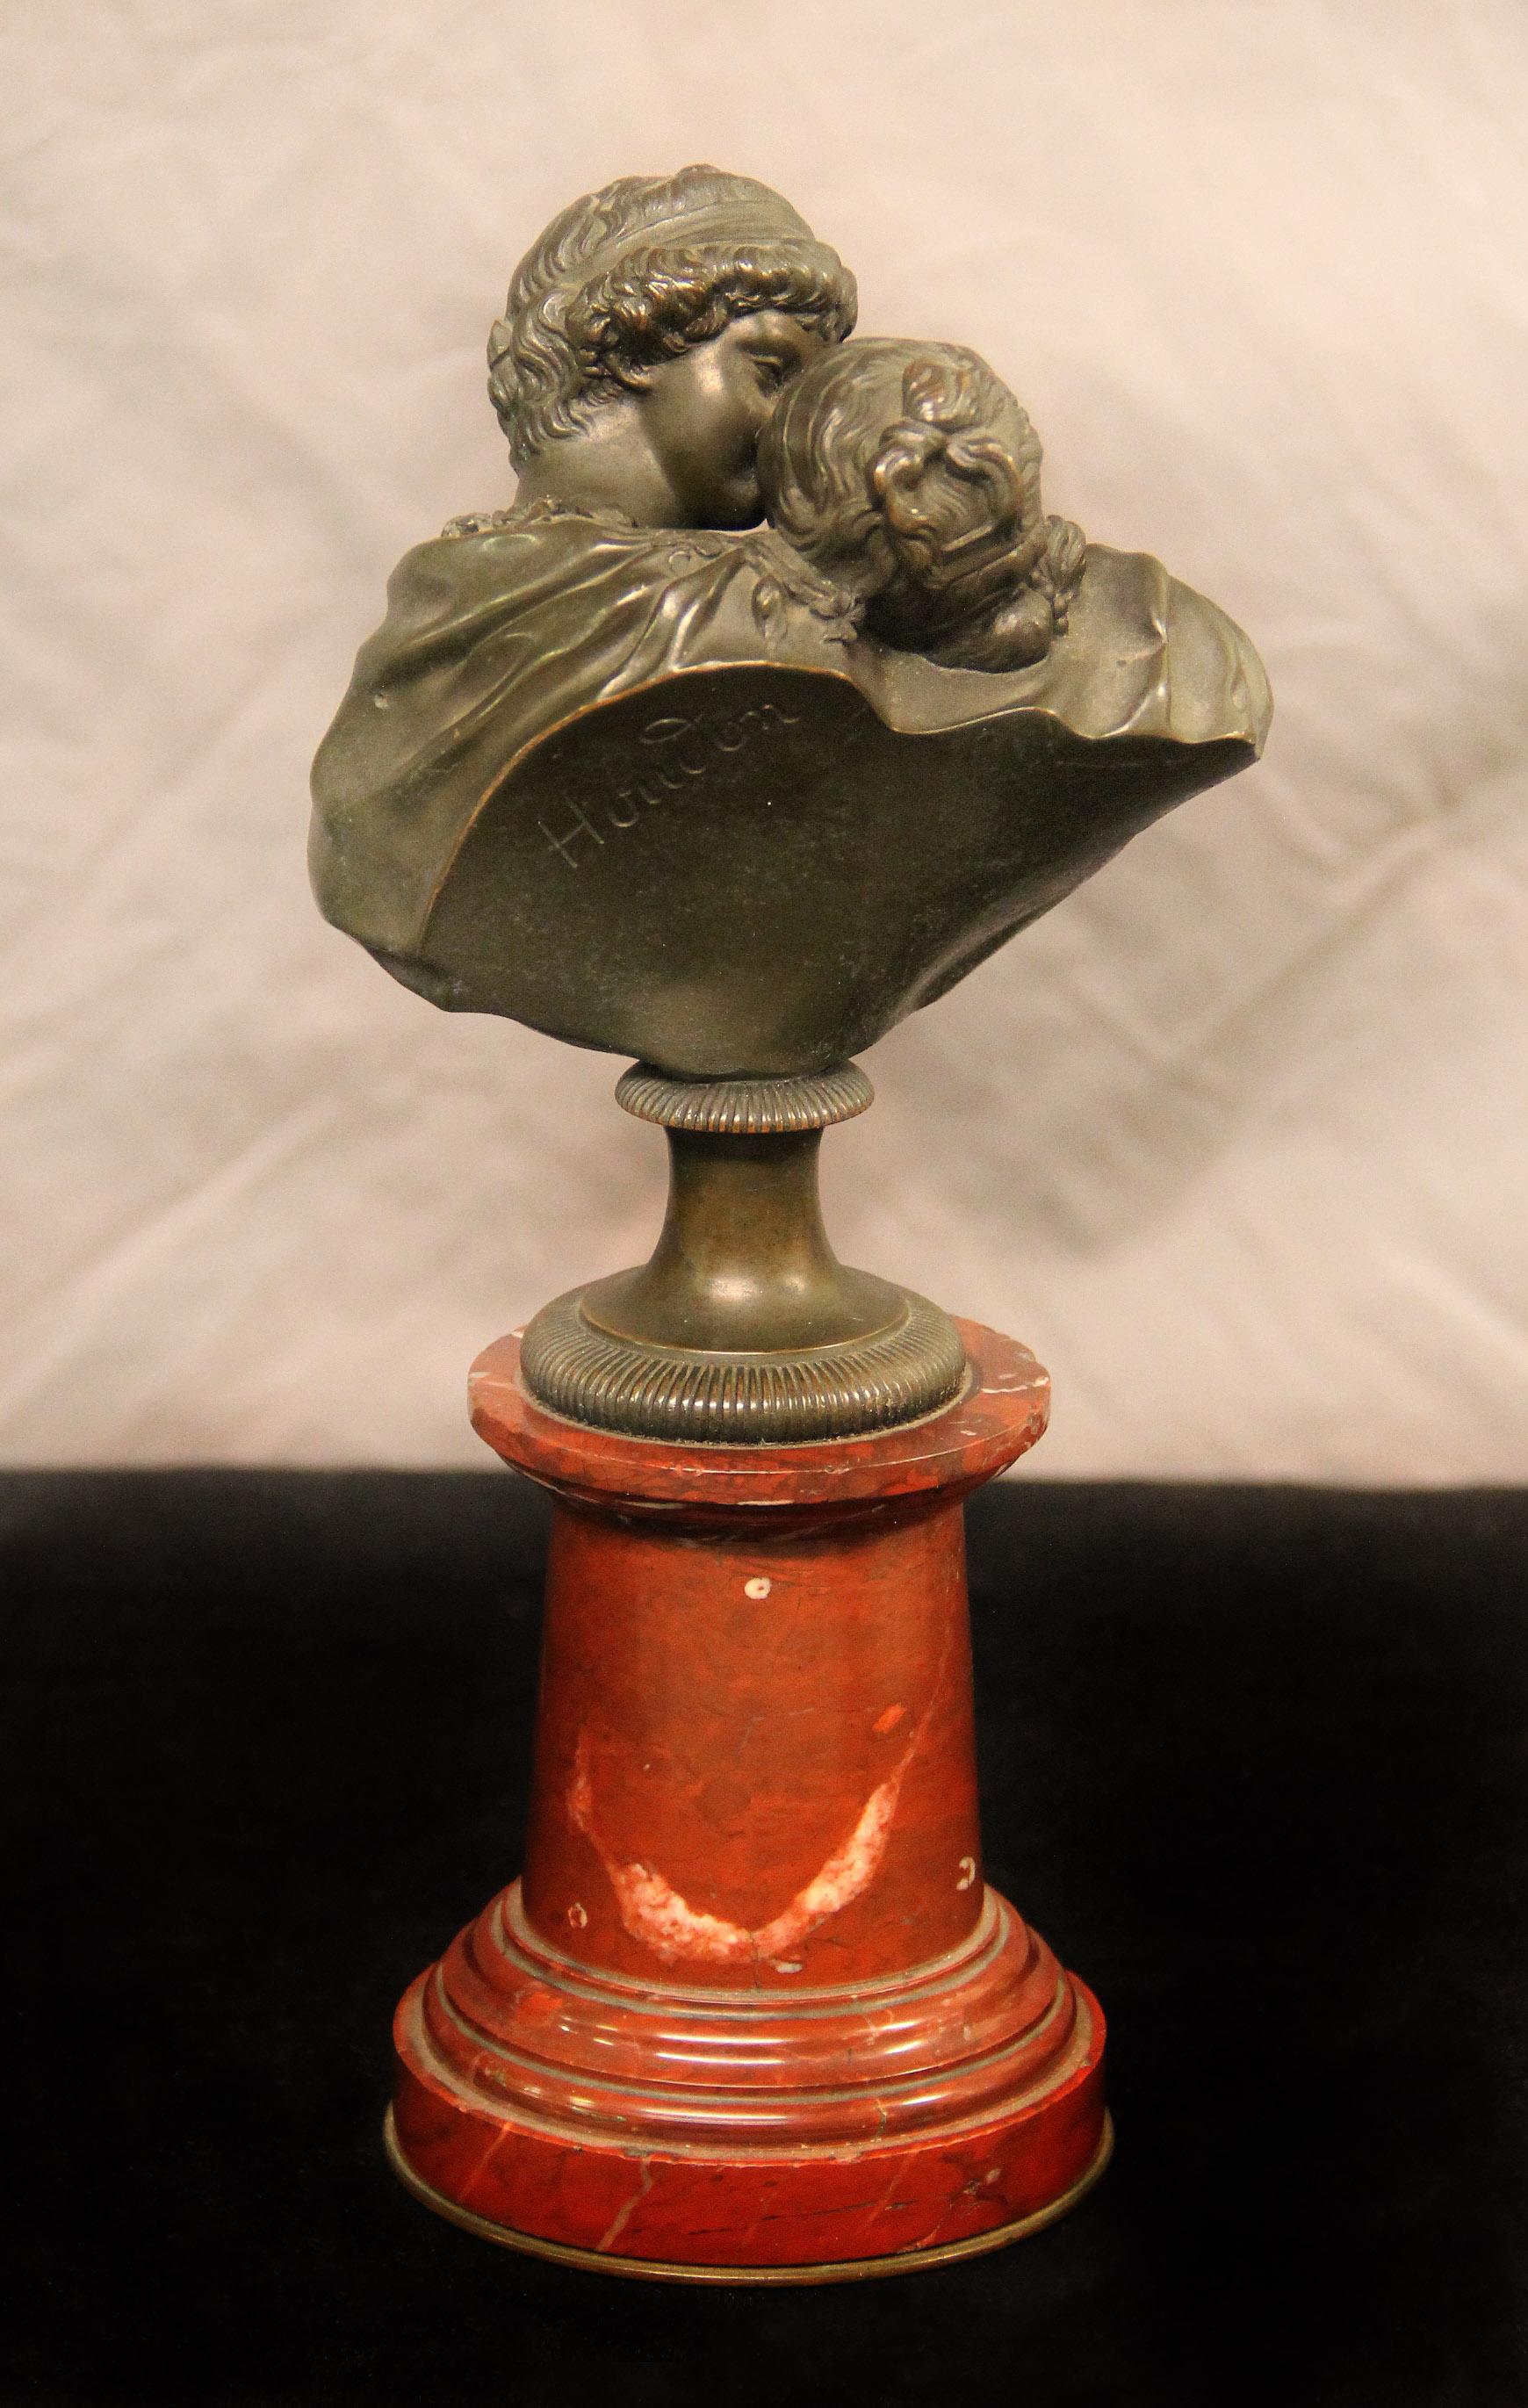 French Fine 19th Century Bronze Bust Entitled “Le Baiser” by Jean- Antoine Houdon